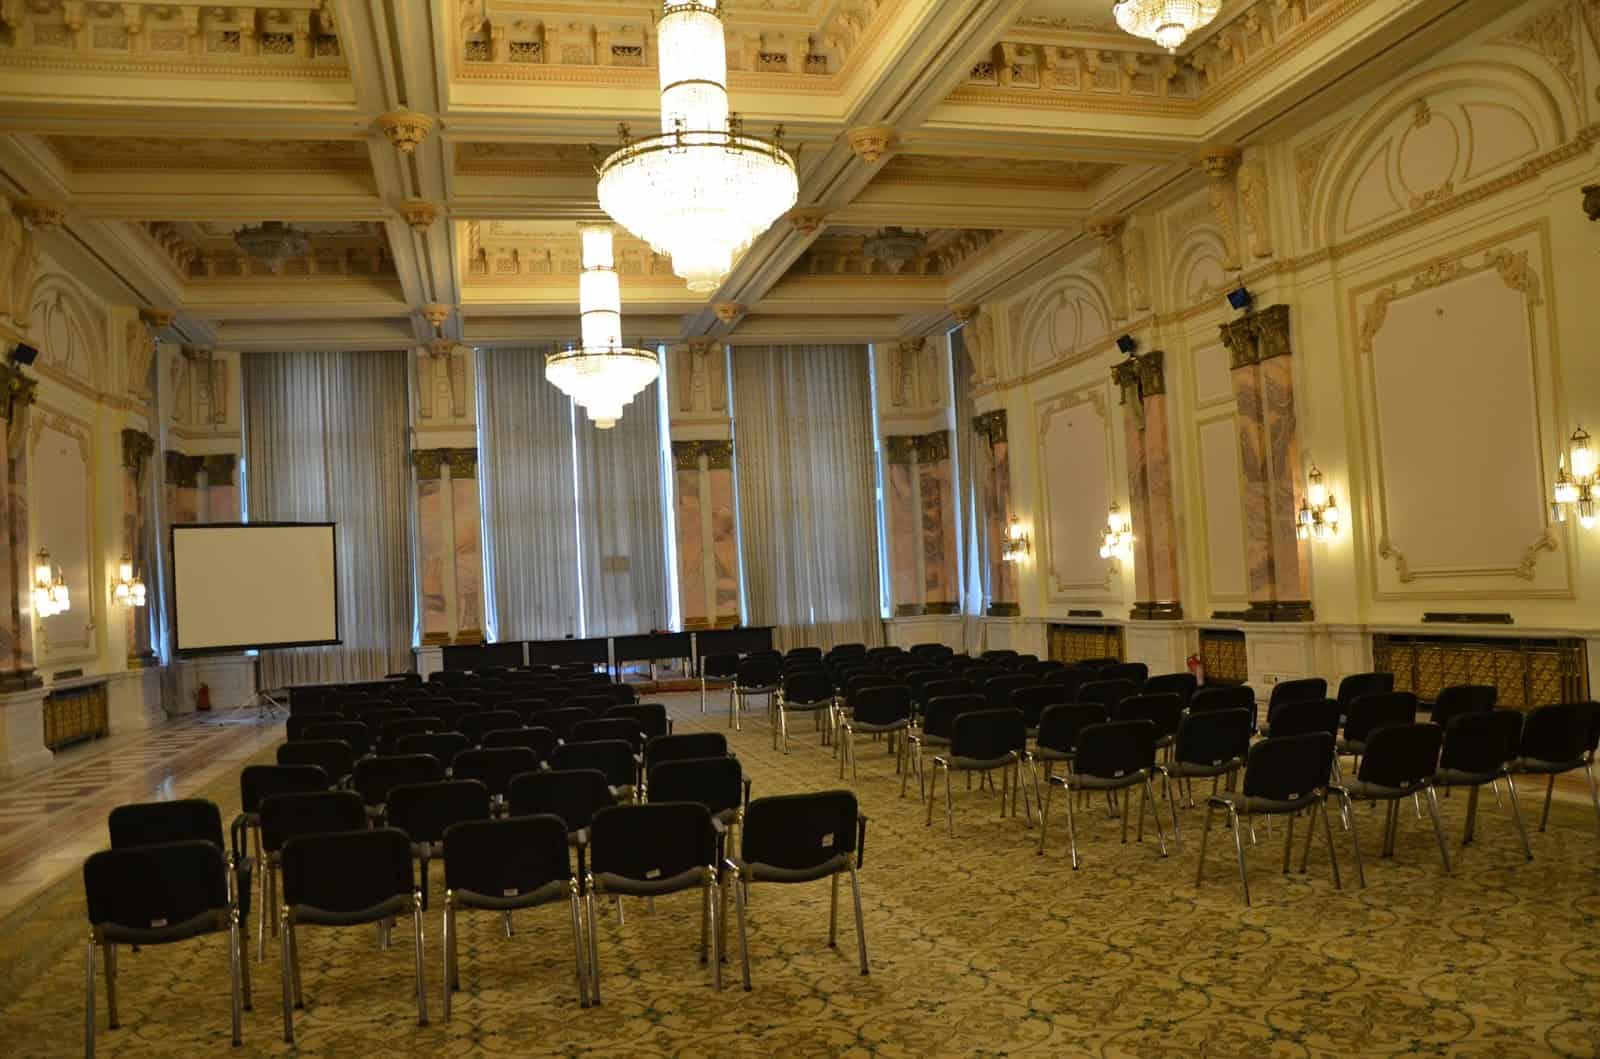 Bălcescu Hall at Palace of Parliament in Bucharest, Romania